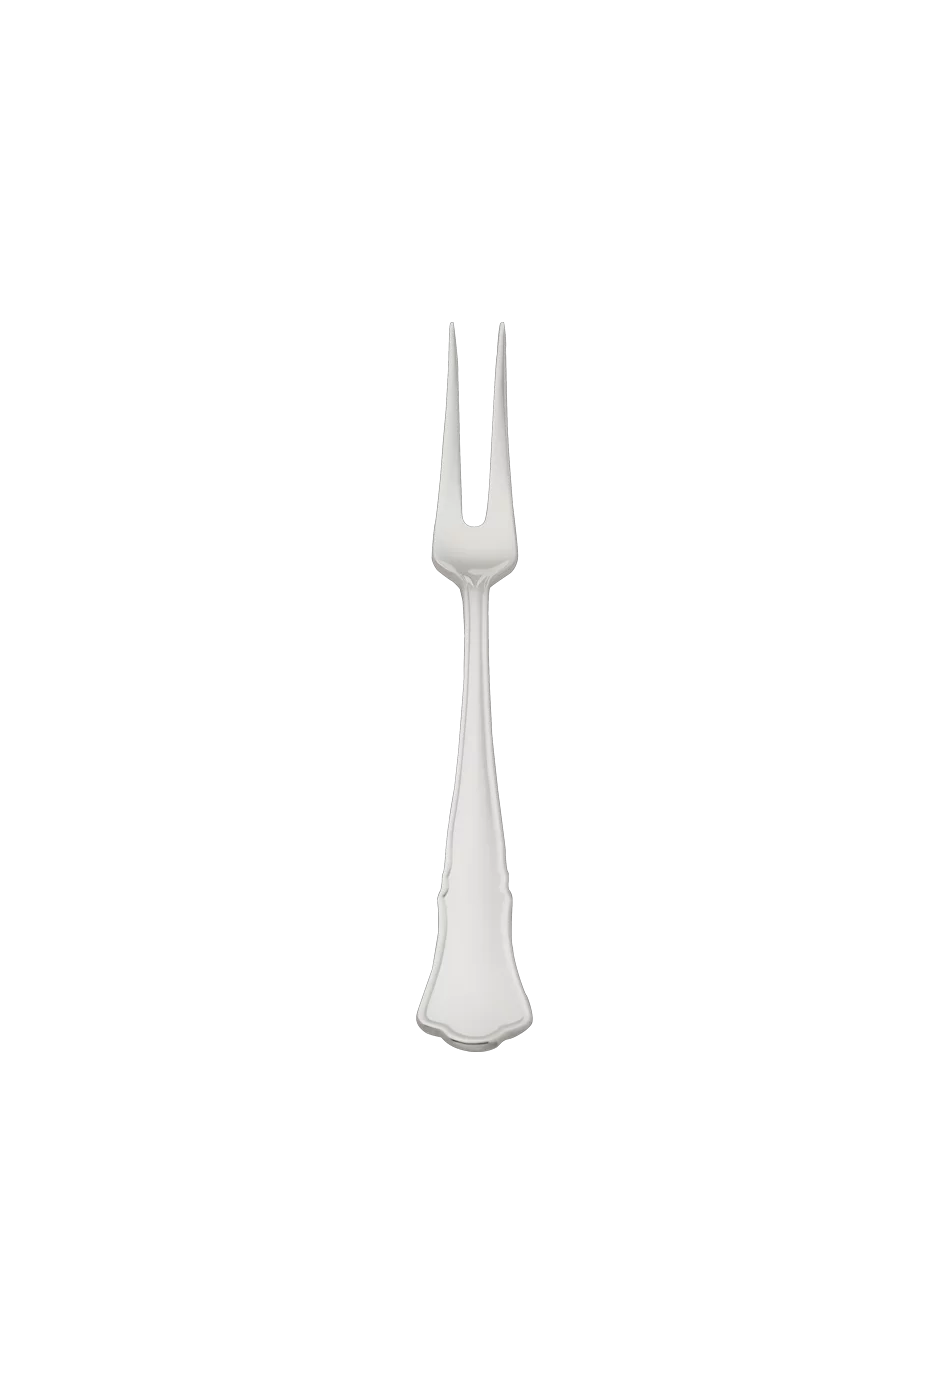 Alt-Chippendale Meat Fork, large (150g massive silverplated)